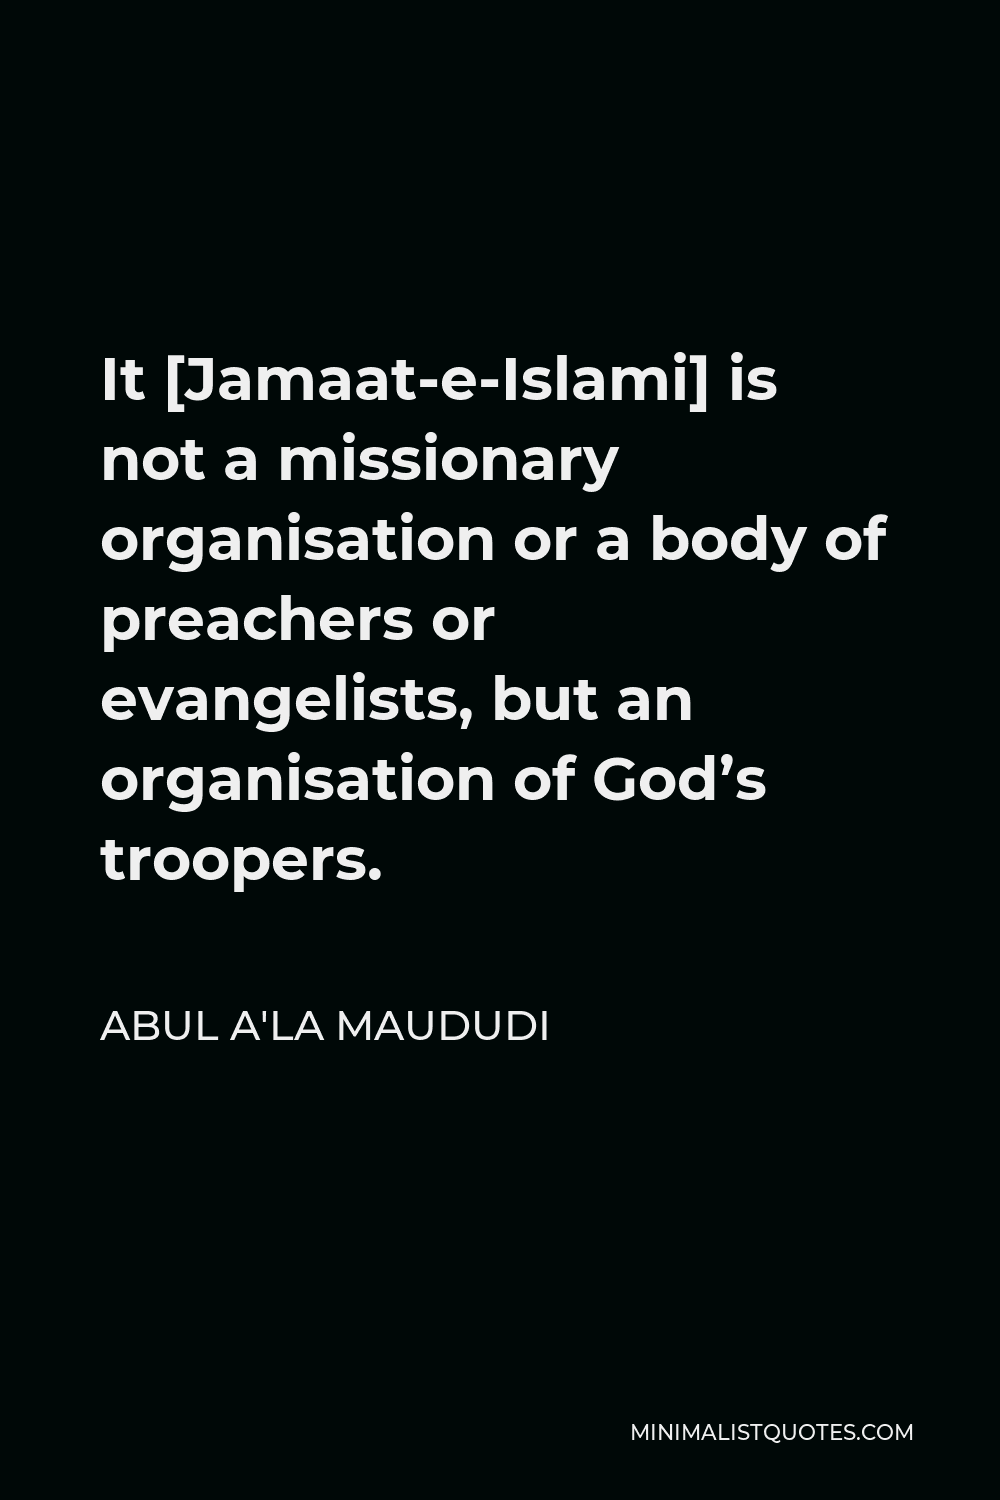 Abul A'la Maududi Quote - It [Jamaat-e-Islami] is not a missionary organisation or a body of preachers or evangelists, but an organisation of God’s troopers.